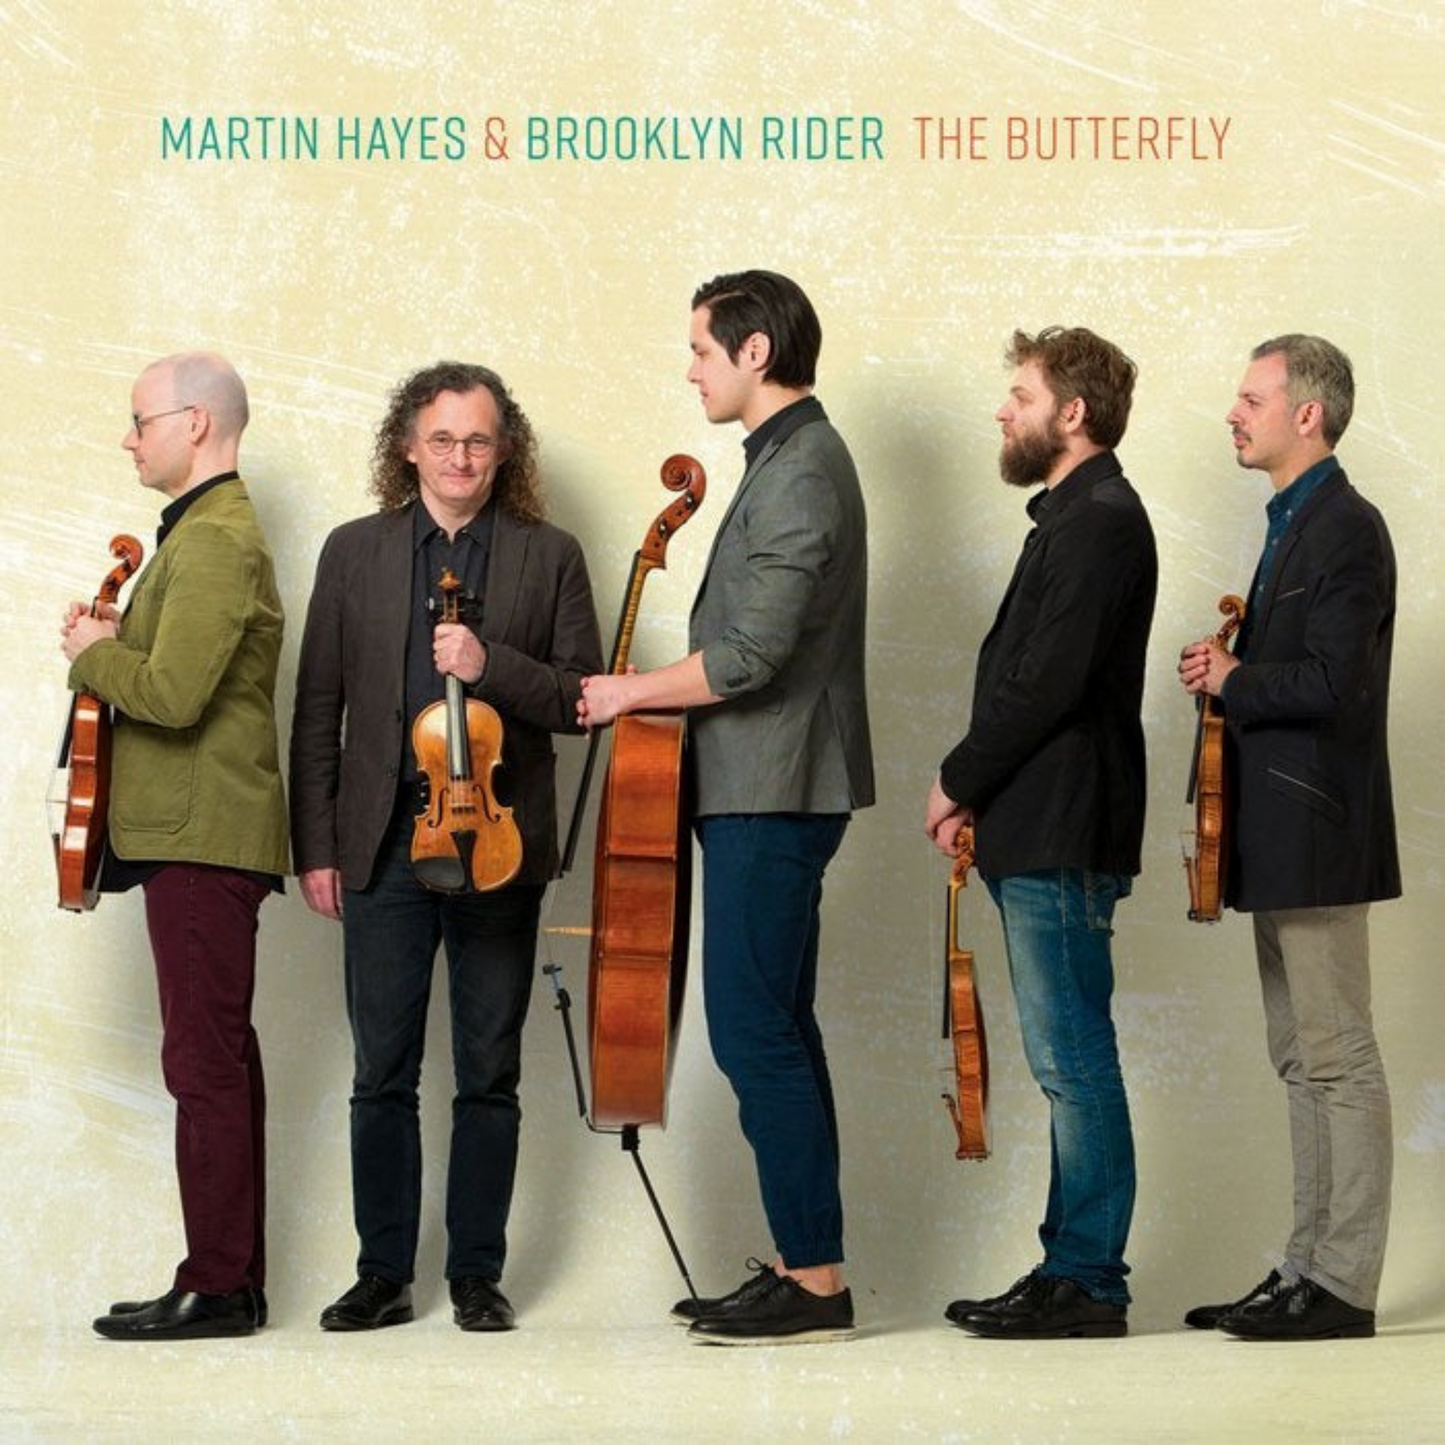 Martin Hayes & Brooklyn Rider - The Butterfly